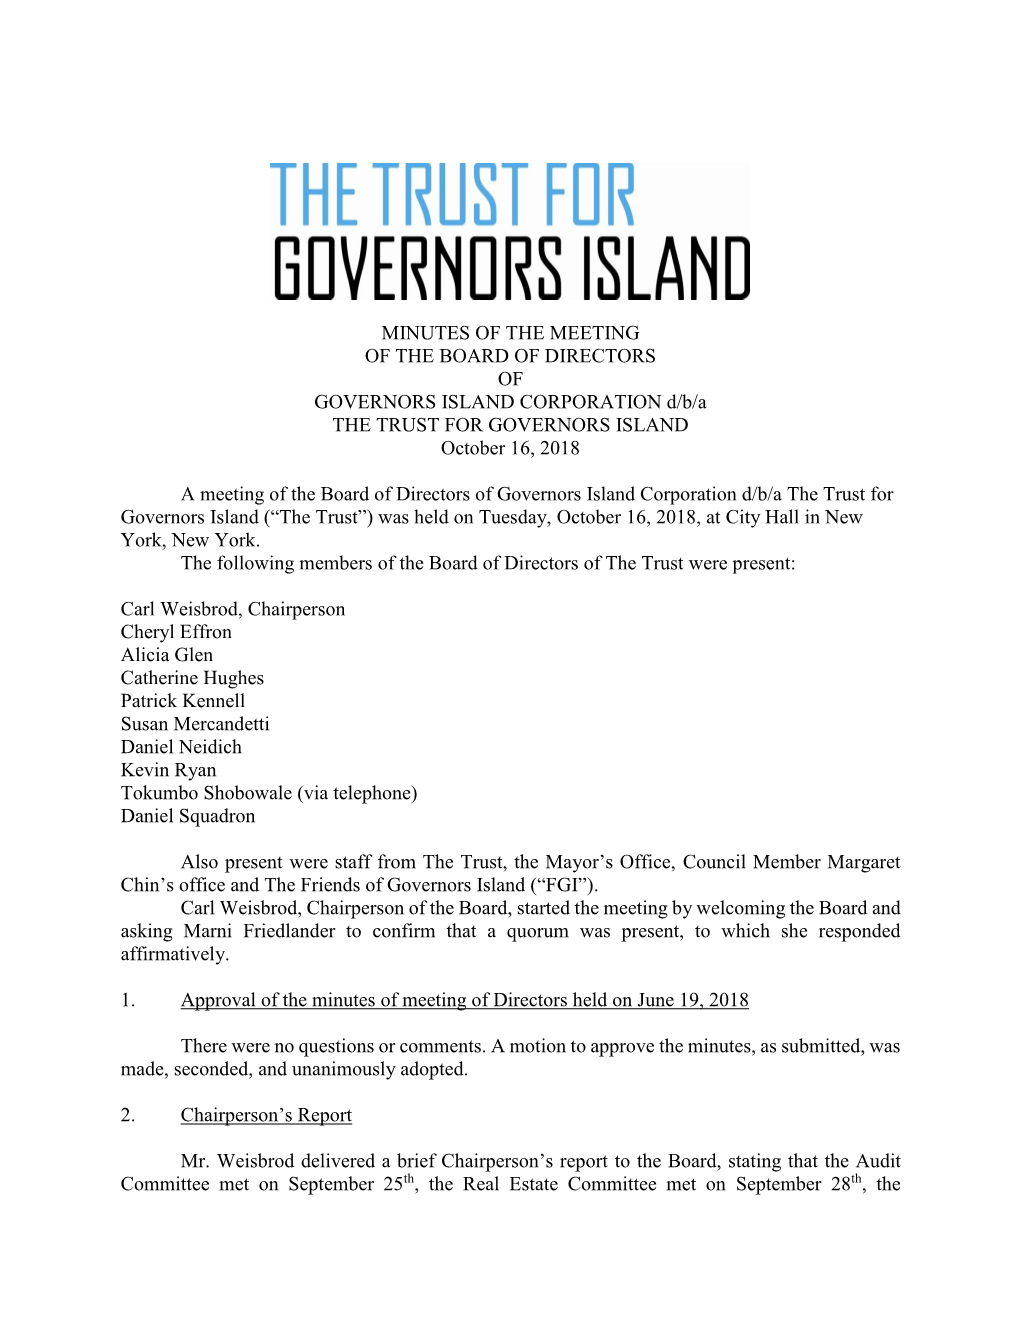 MINUTES of the MEETING of the BOARD of DIRECTORS of GOVERNORS ISLAND CORPORATION D/B/A the TRUST for GOVERNORS ISLAND October 16, 2018